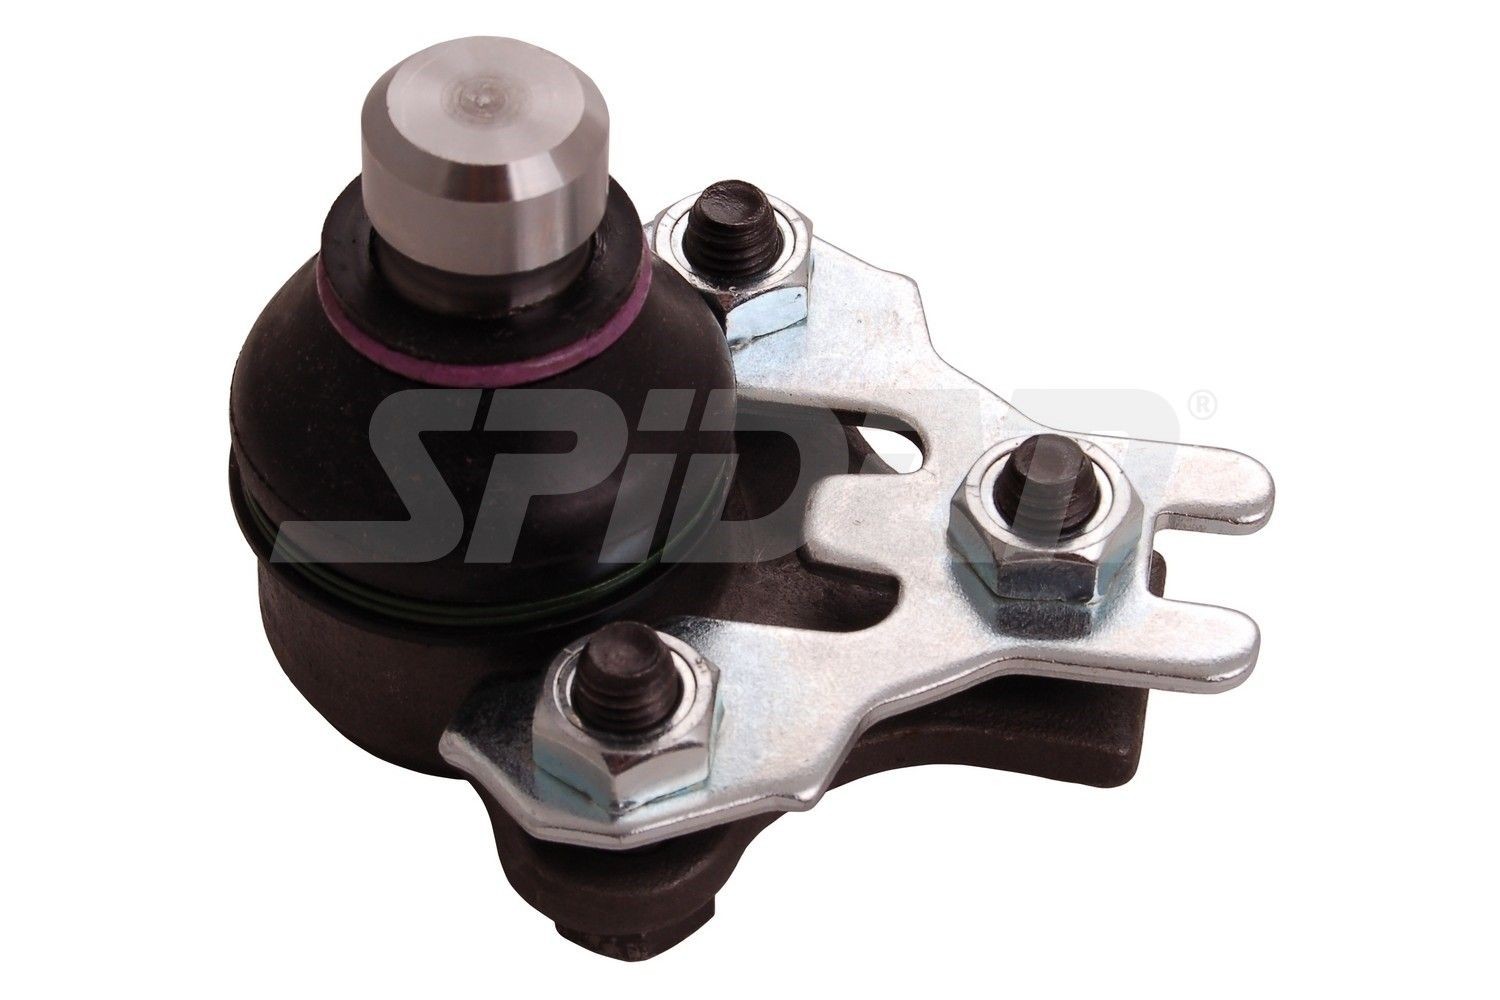 Volkswagen POLO Ball joint 14701927 SPIDAN CHASSIS PARTS 45098 online buy